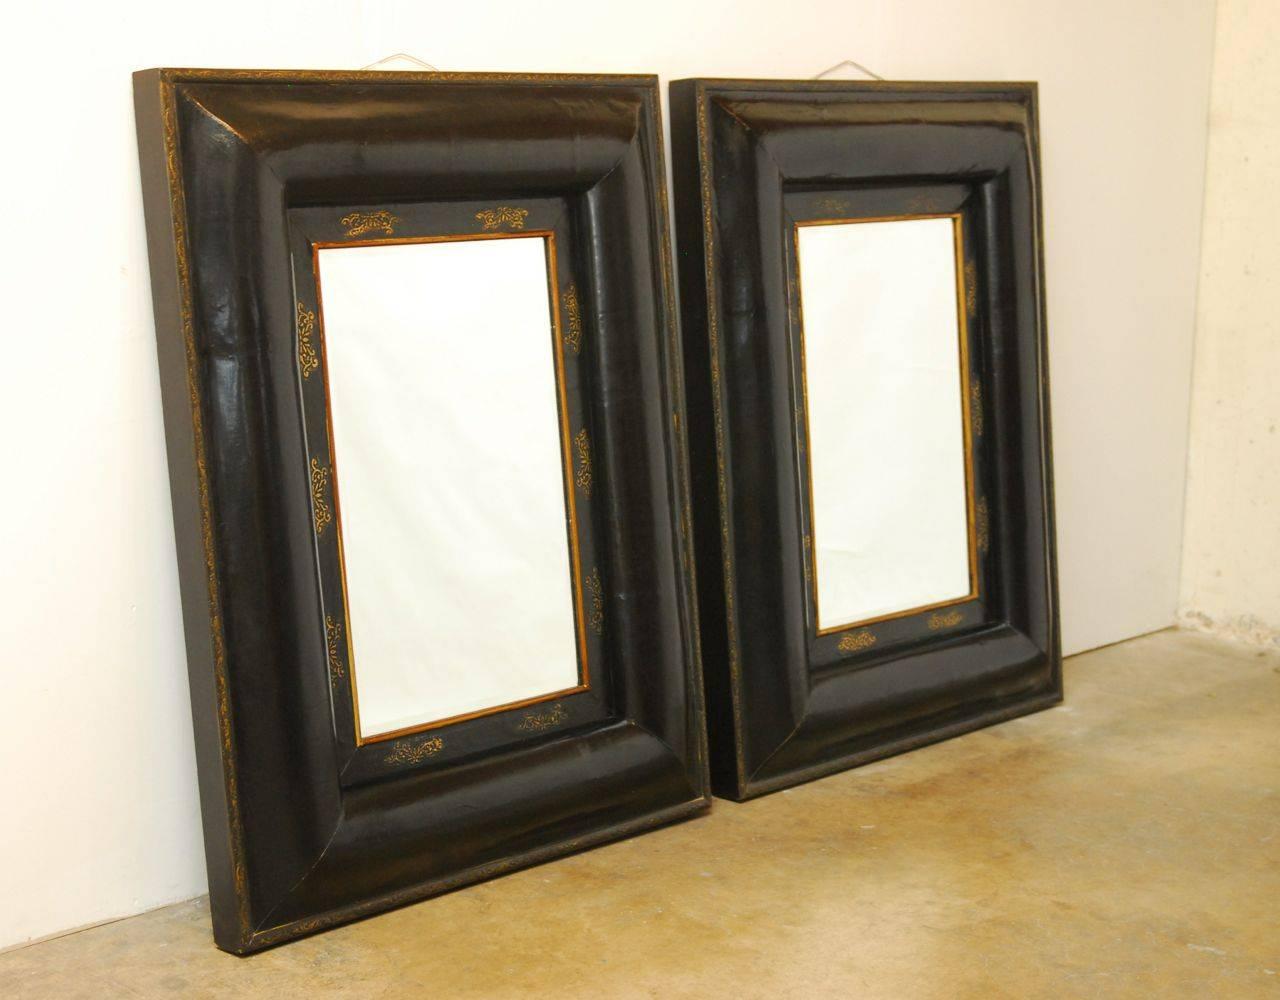 Striking pair of huge ebonized Portuguese mirrors mounted in heavy wooden frames with a beautiful plaster faux finish. Decorated with gilt trim and border with gilt cloud accents around the beveled glass. These lovely mirrors are thick and have a